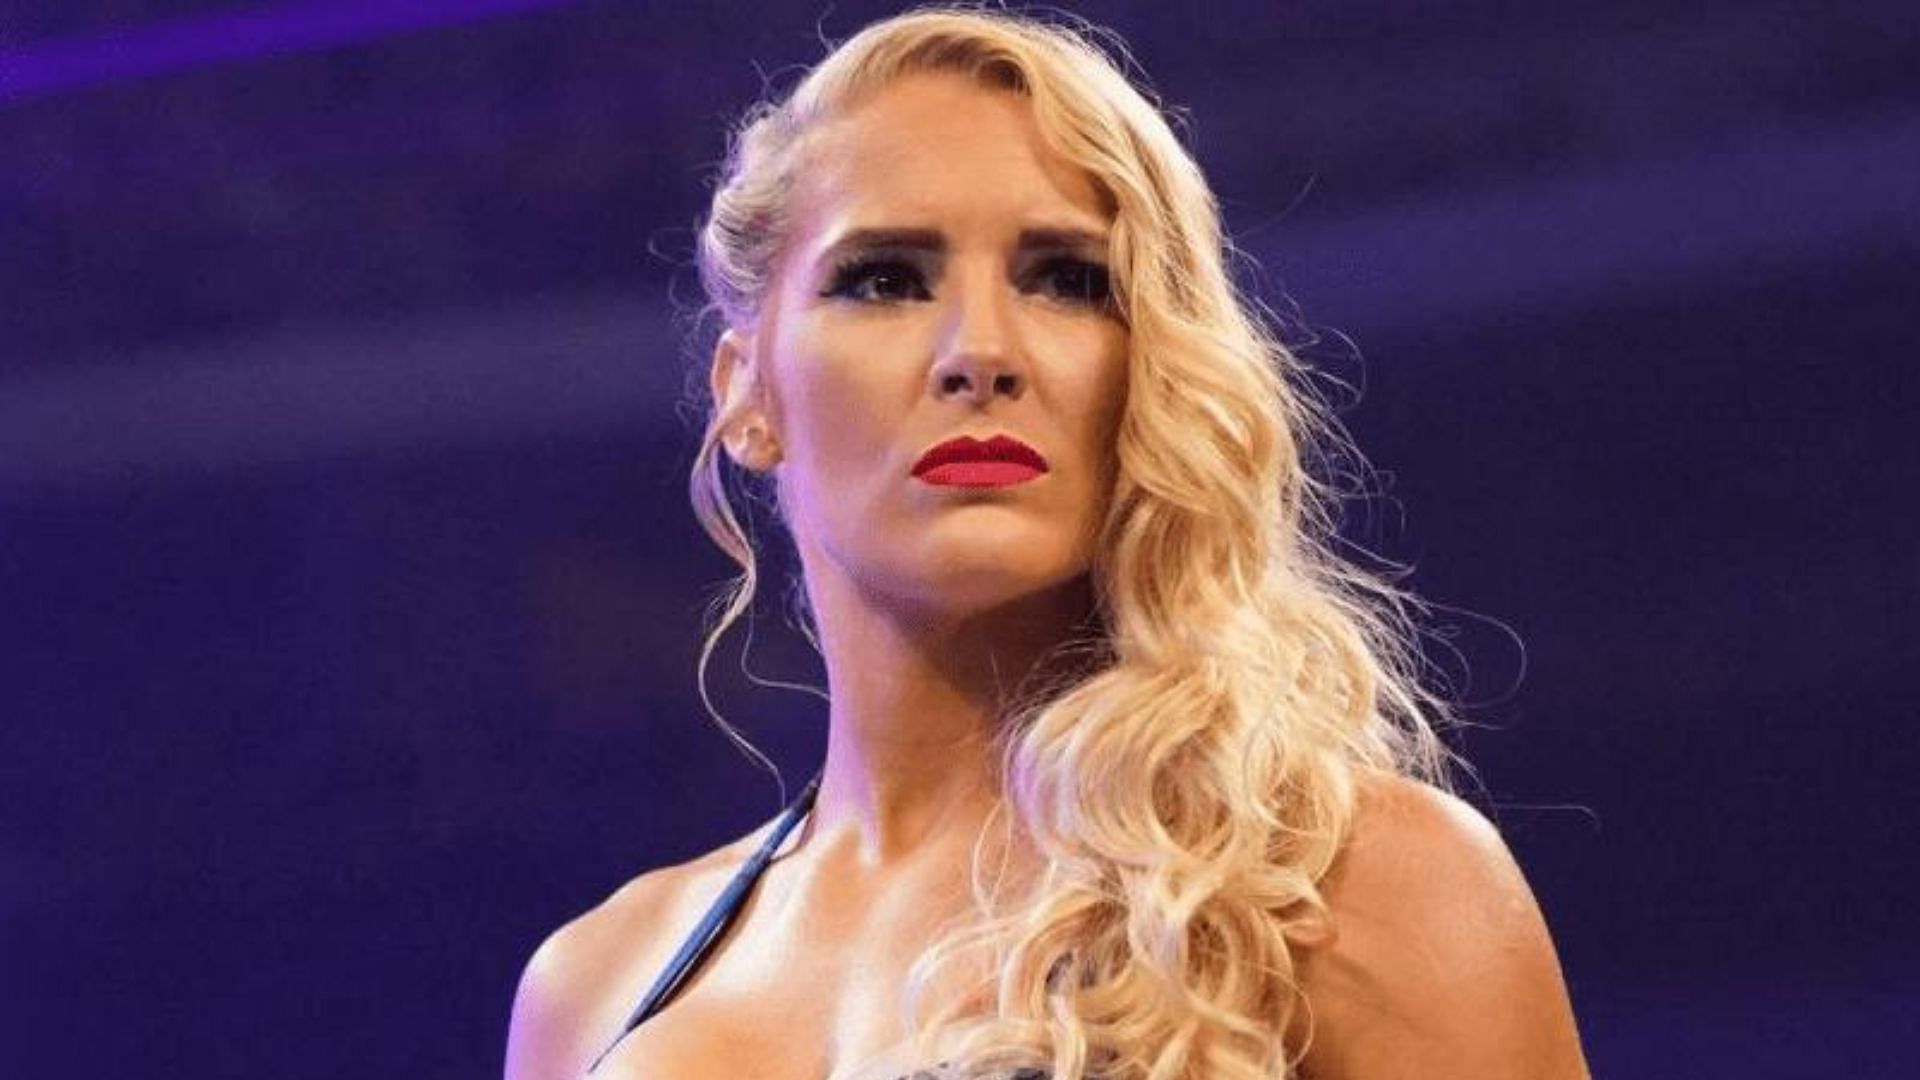 WWE fans are not happy with Lacey Evans